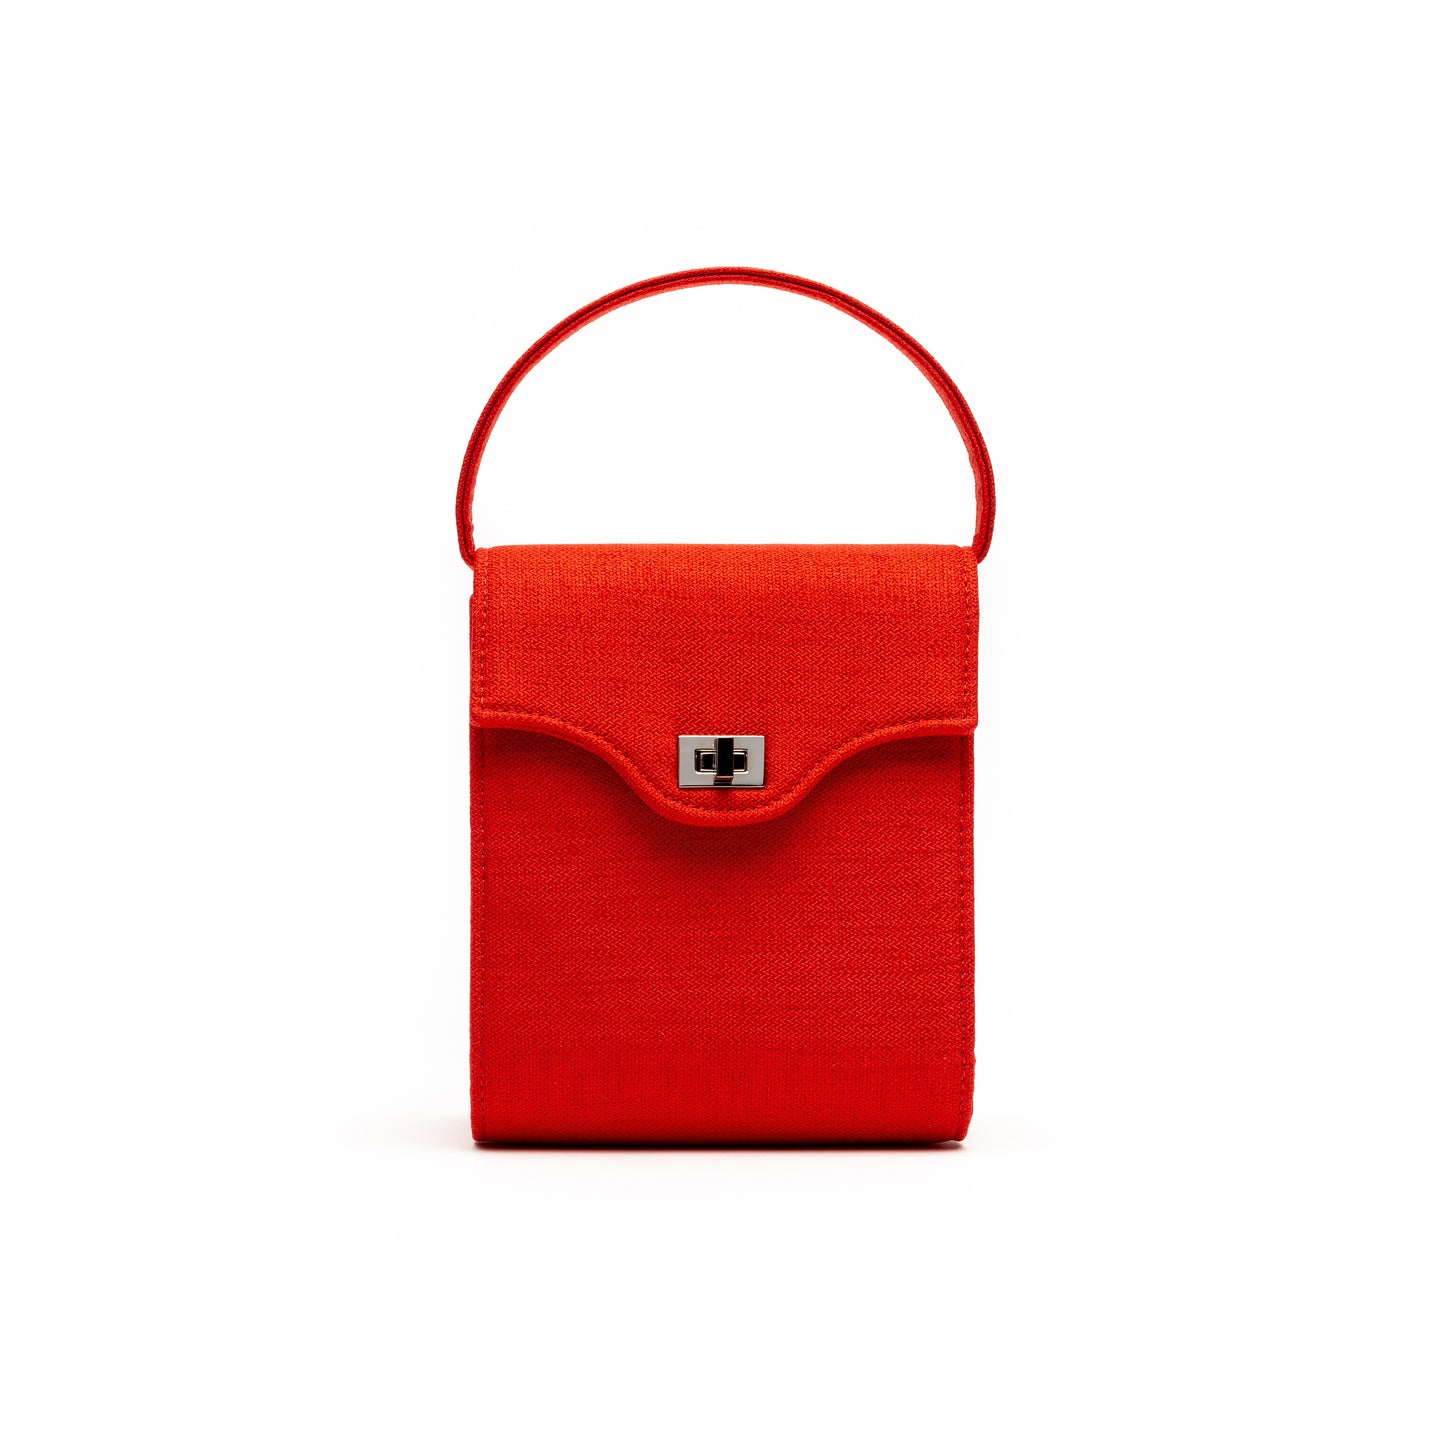 Cucci- Red Woven Fabric Bag